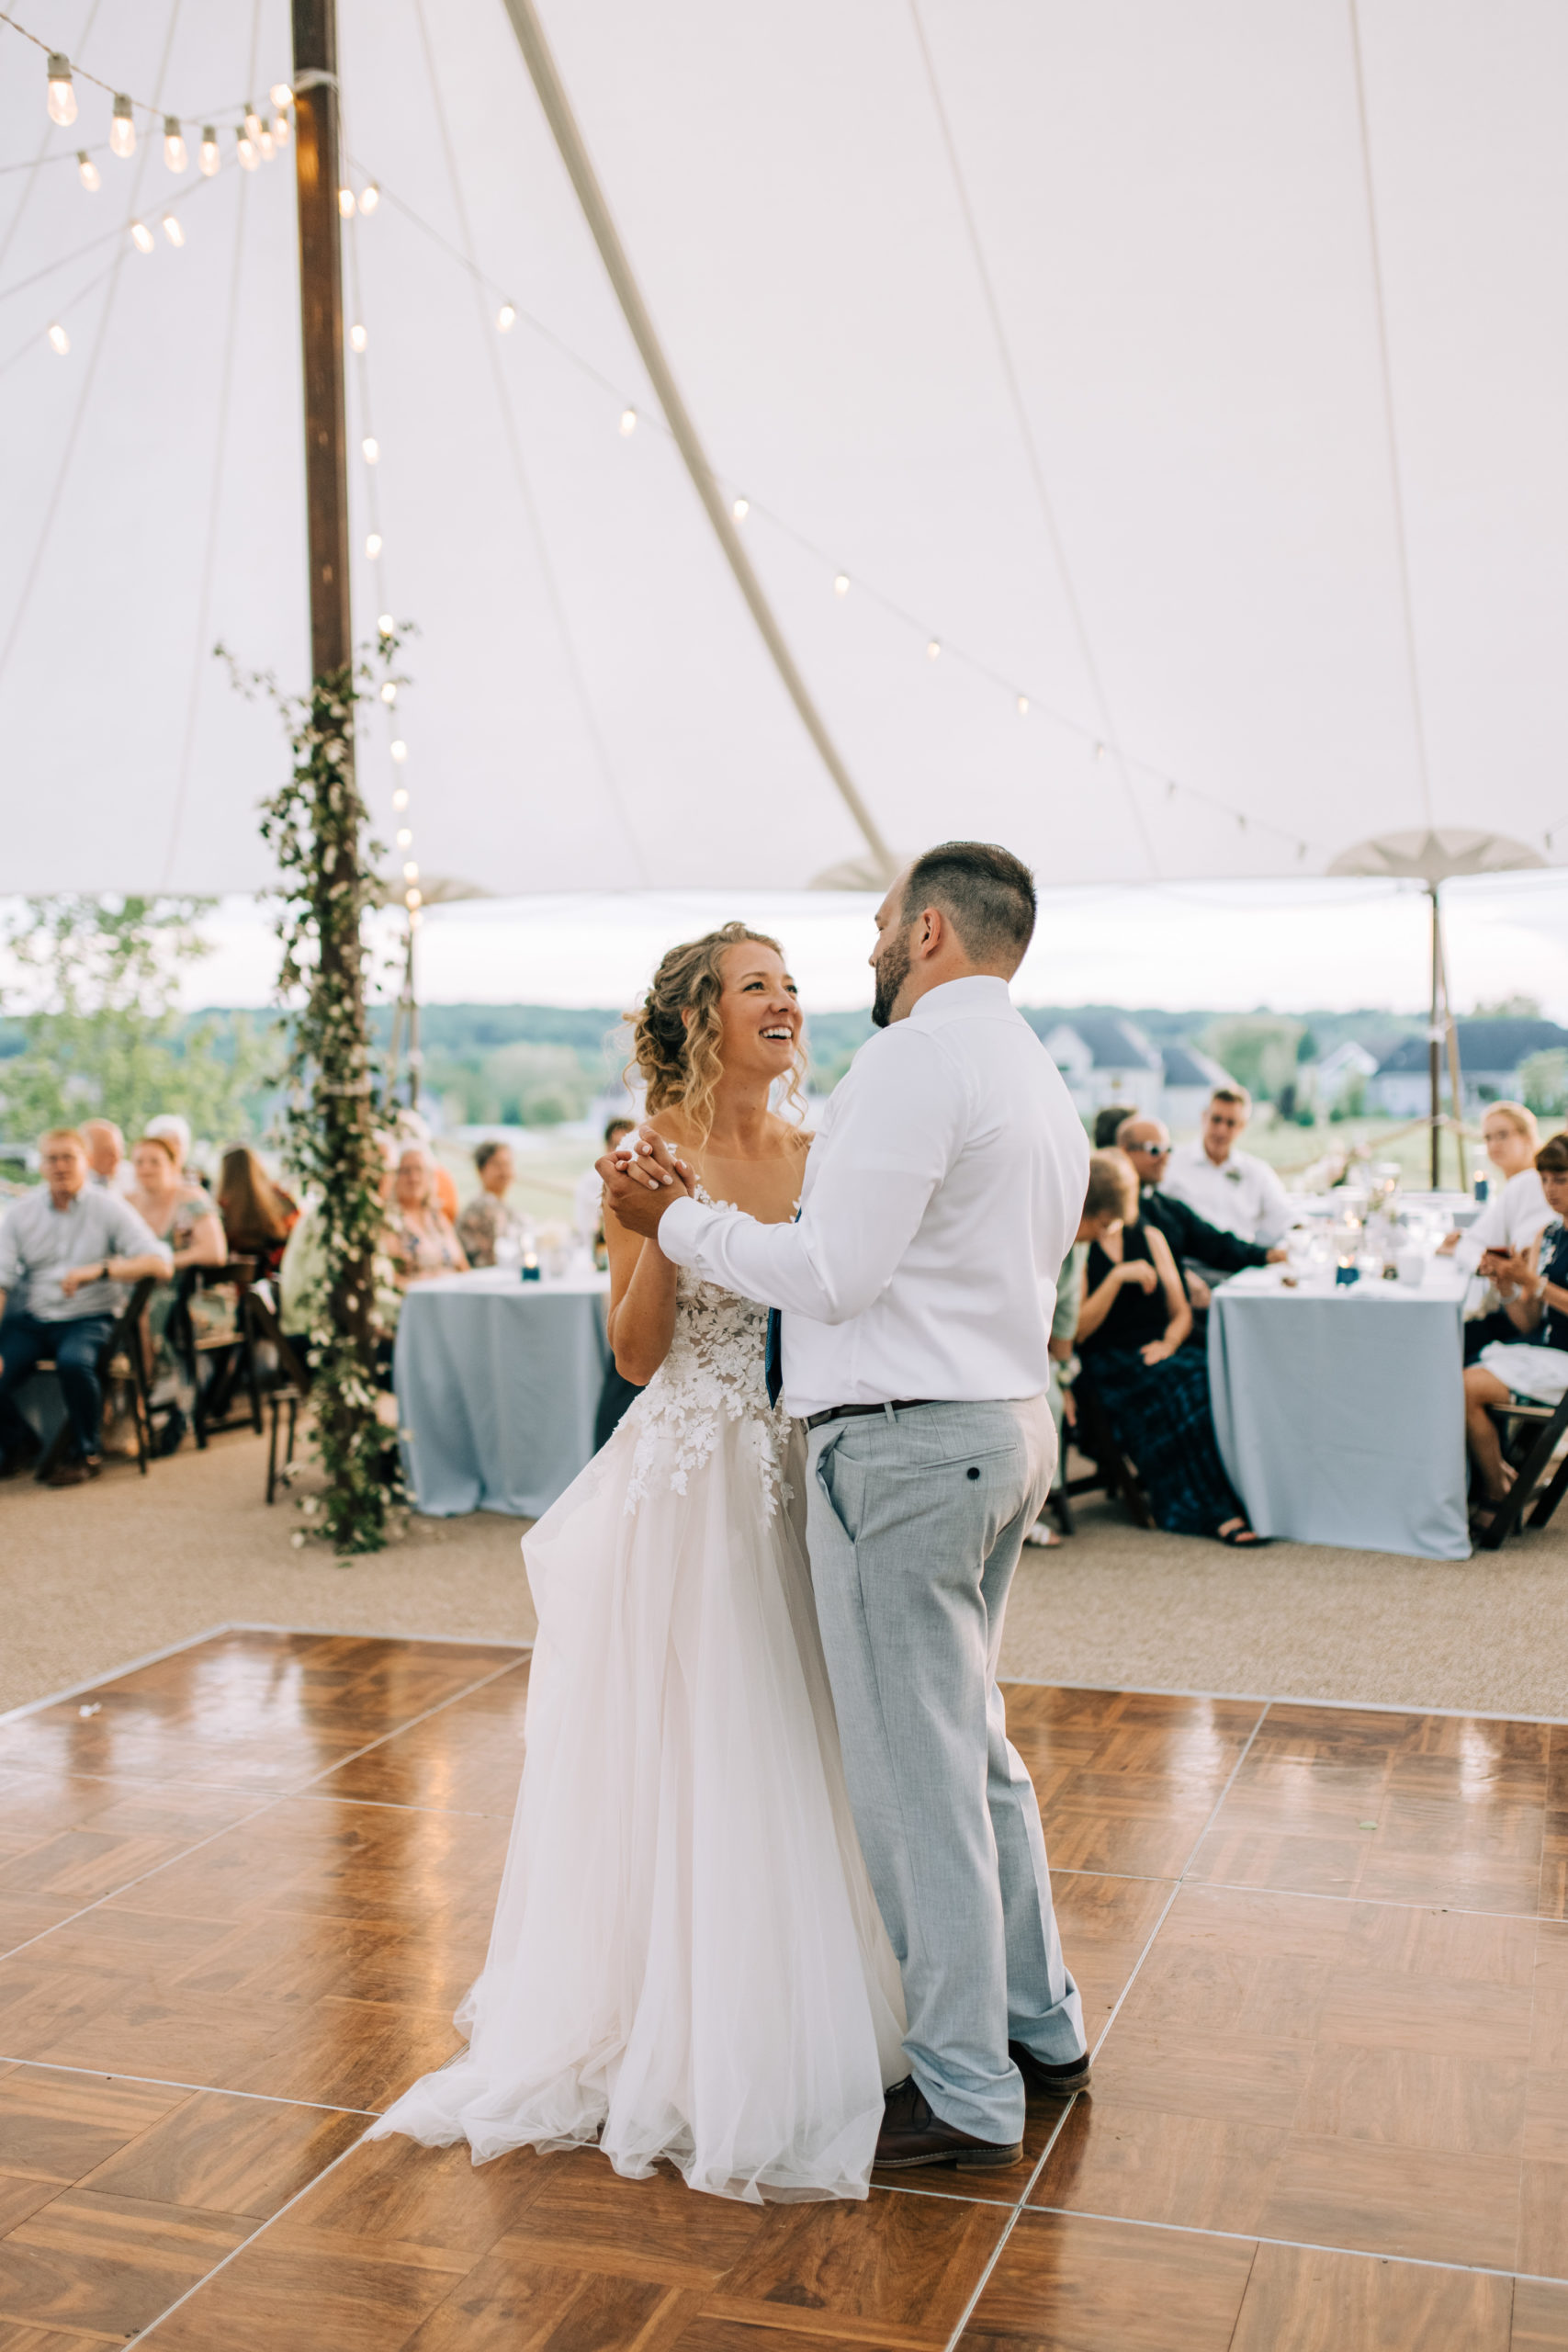 With a love for travel and adventure, Julie & Alex's Mountain-esque Tented Wedding was centered around natural blue and green tones...